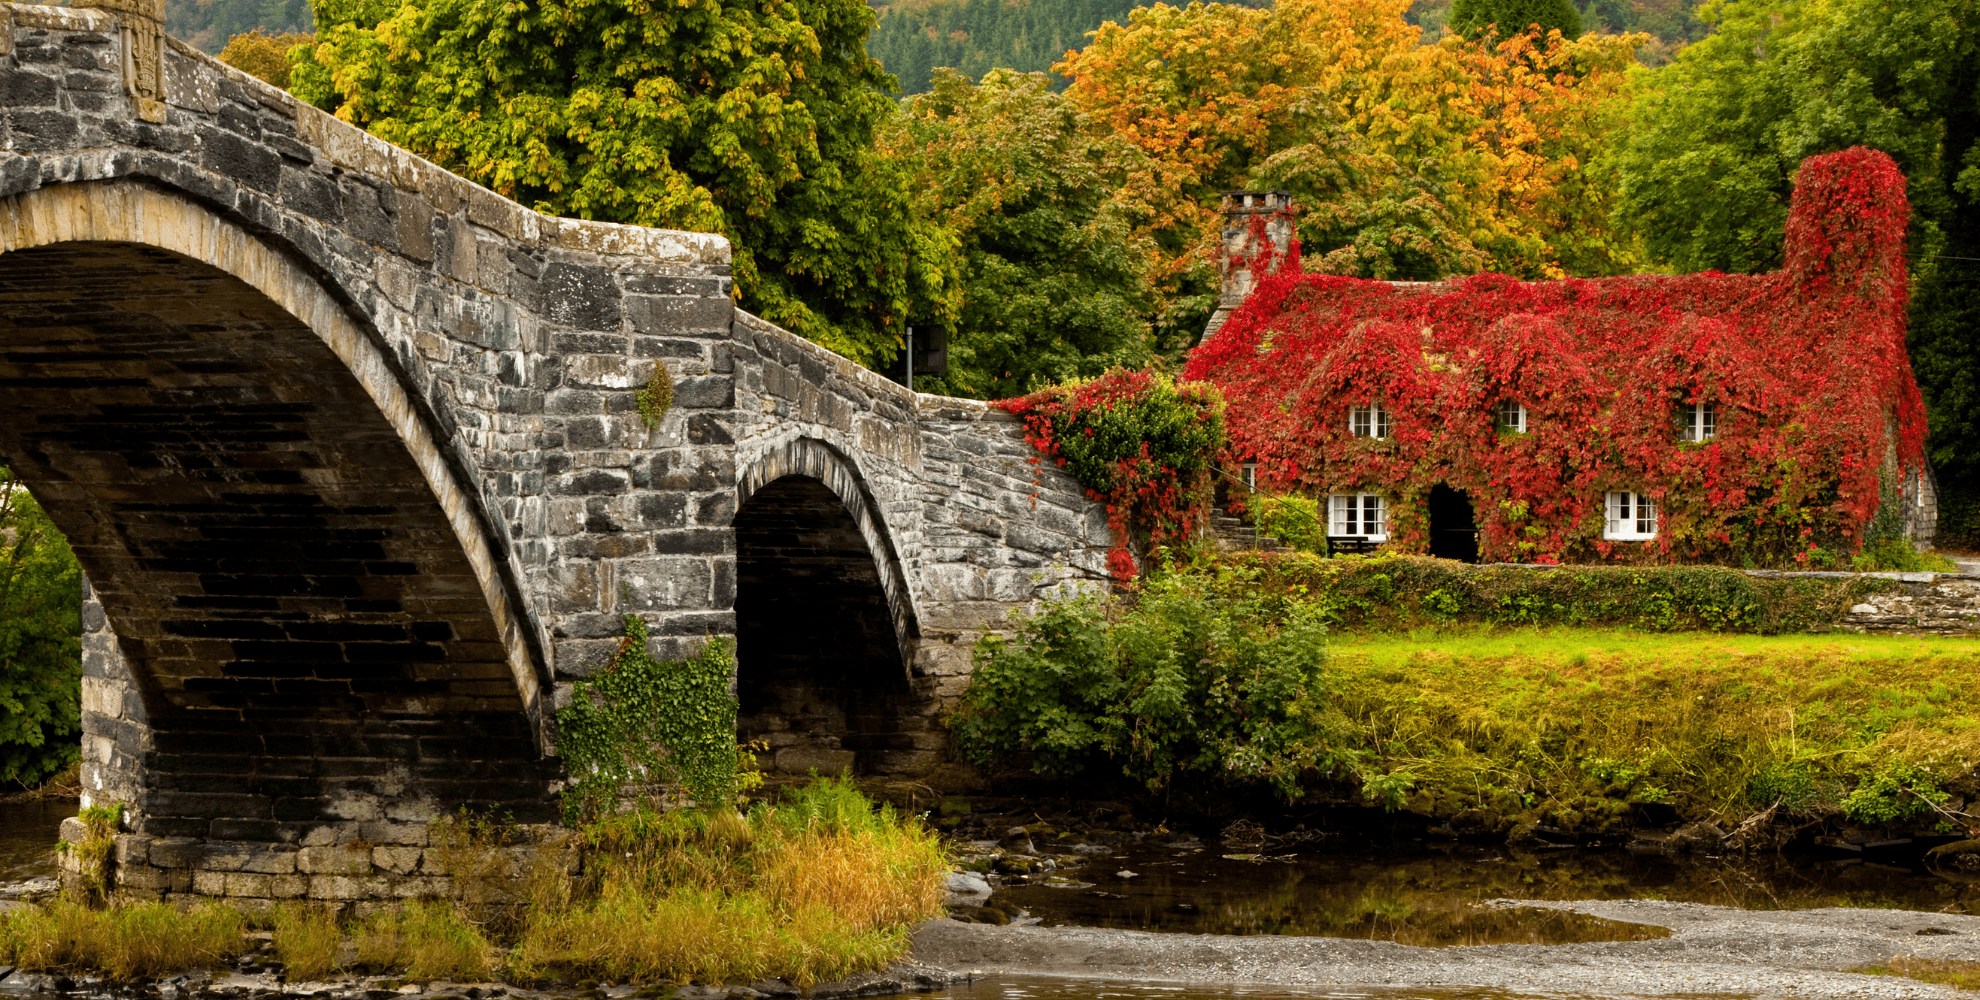 bridge and house in wales